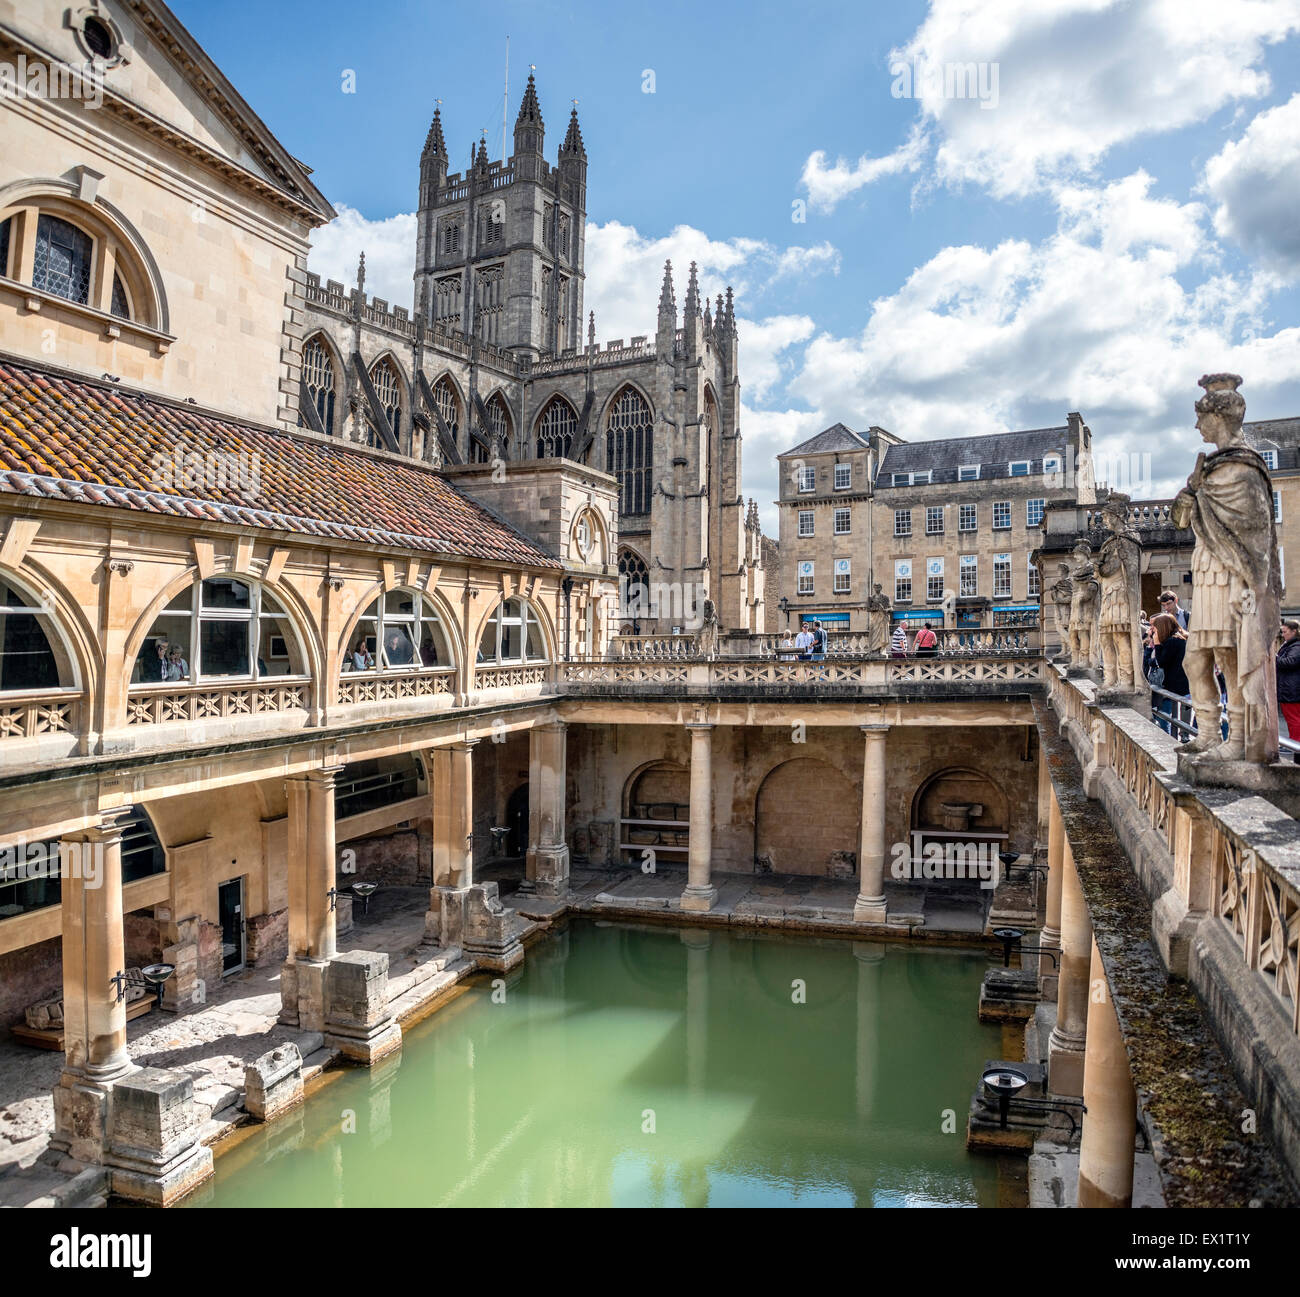 The Roman Baths complex, a site of historical interest in the English city of Bath, Somerset, England. Stock Photo